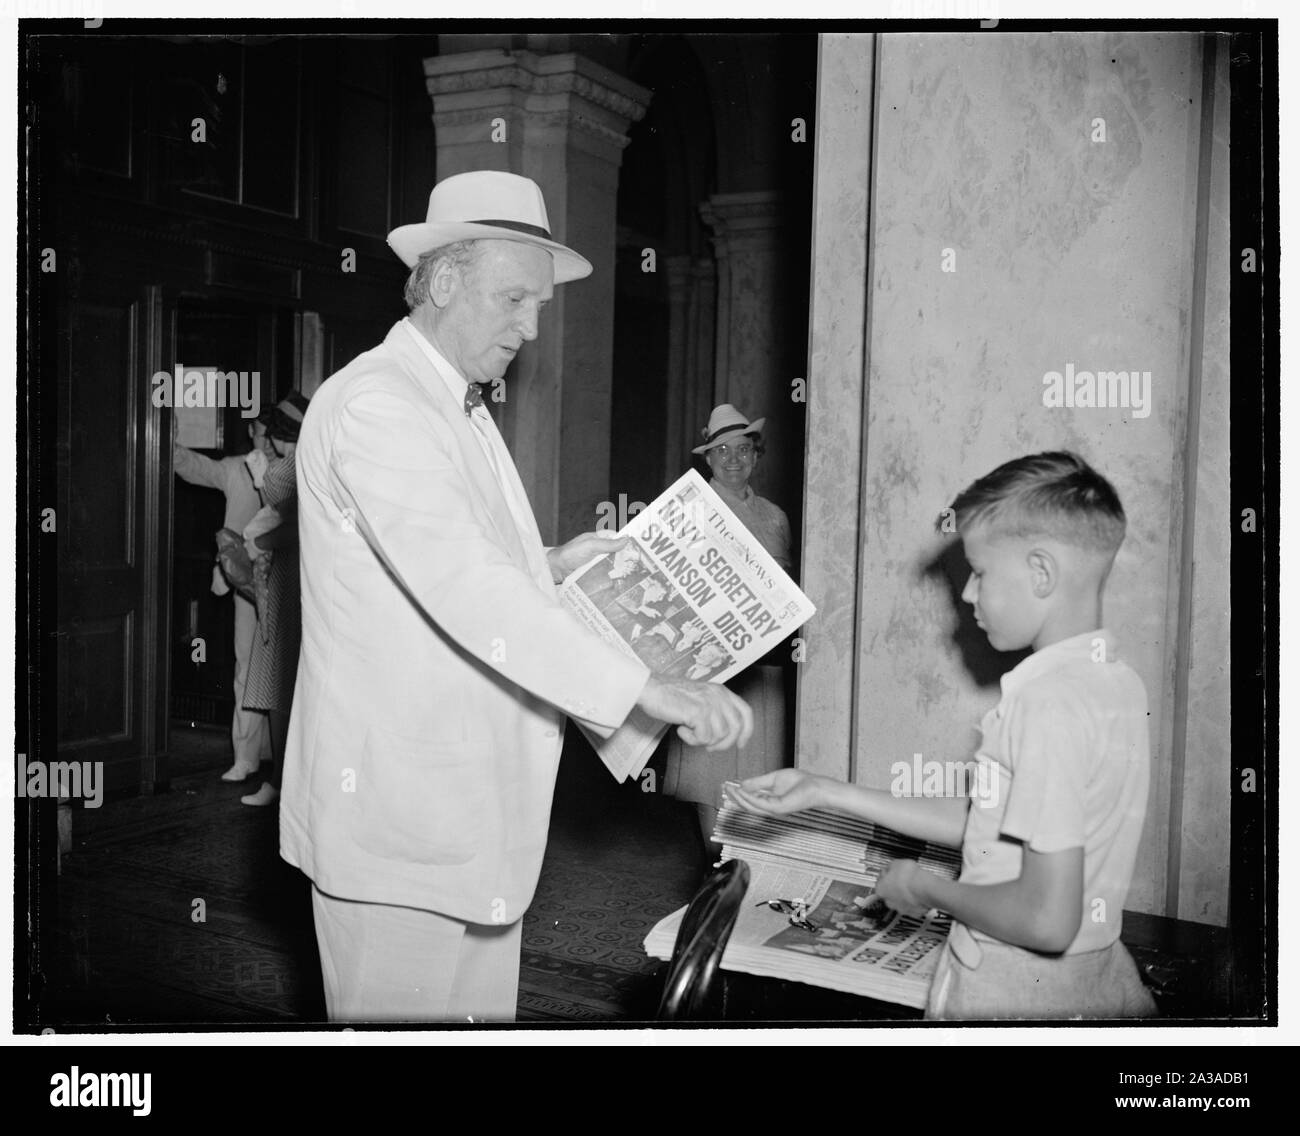 Sen. Ashurst buys paper announcing death of Secretary Swanson. Washington, D.C., July 7. Senator Henry Ashurst of Arizona, Chairman of the Senate Judiciary Committee shown here buying a newspaper at the Capitol today. The headlines announce the death of Navy Secretary Clyde Swanson this morning. News-vendor is 10 year old Benny Brown who operates the newsstand near the Senate Chamber Stock Photo